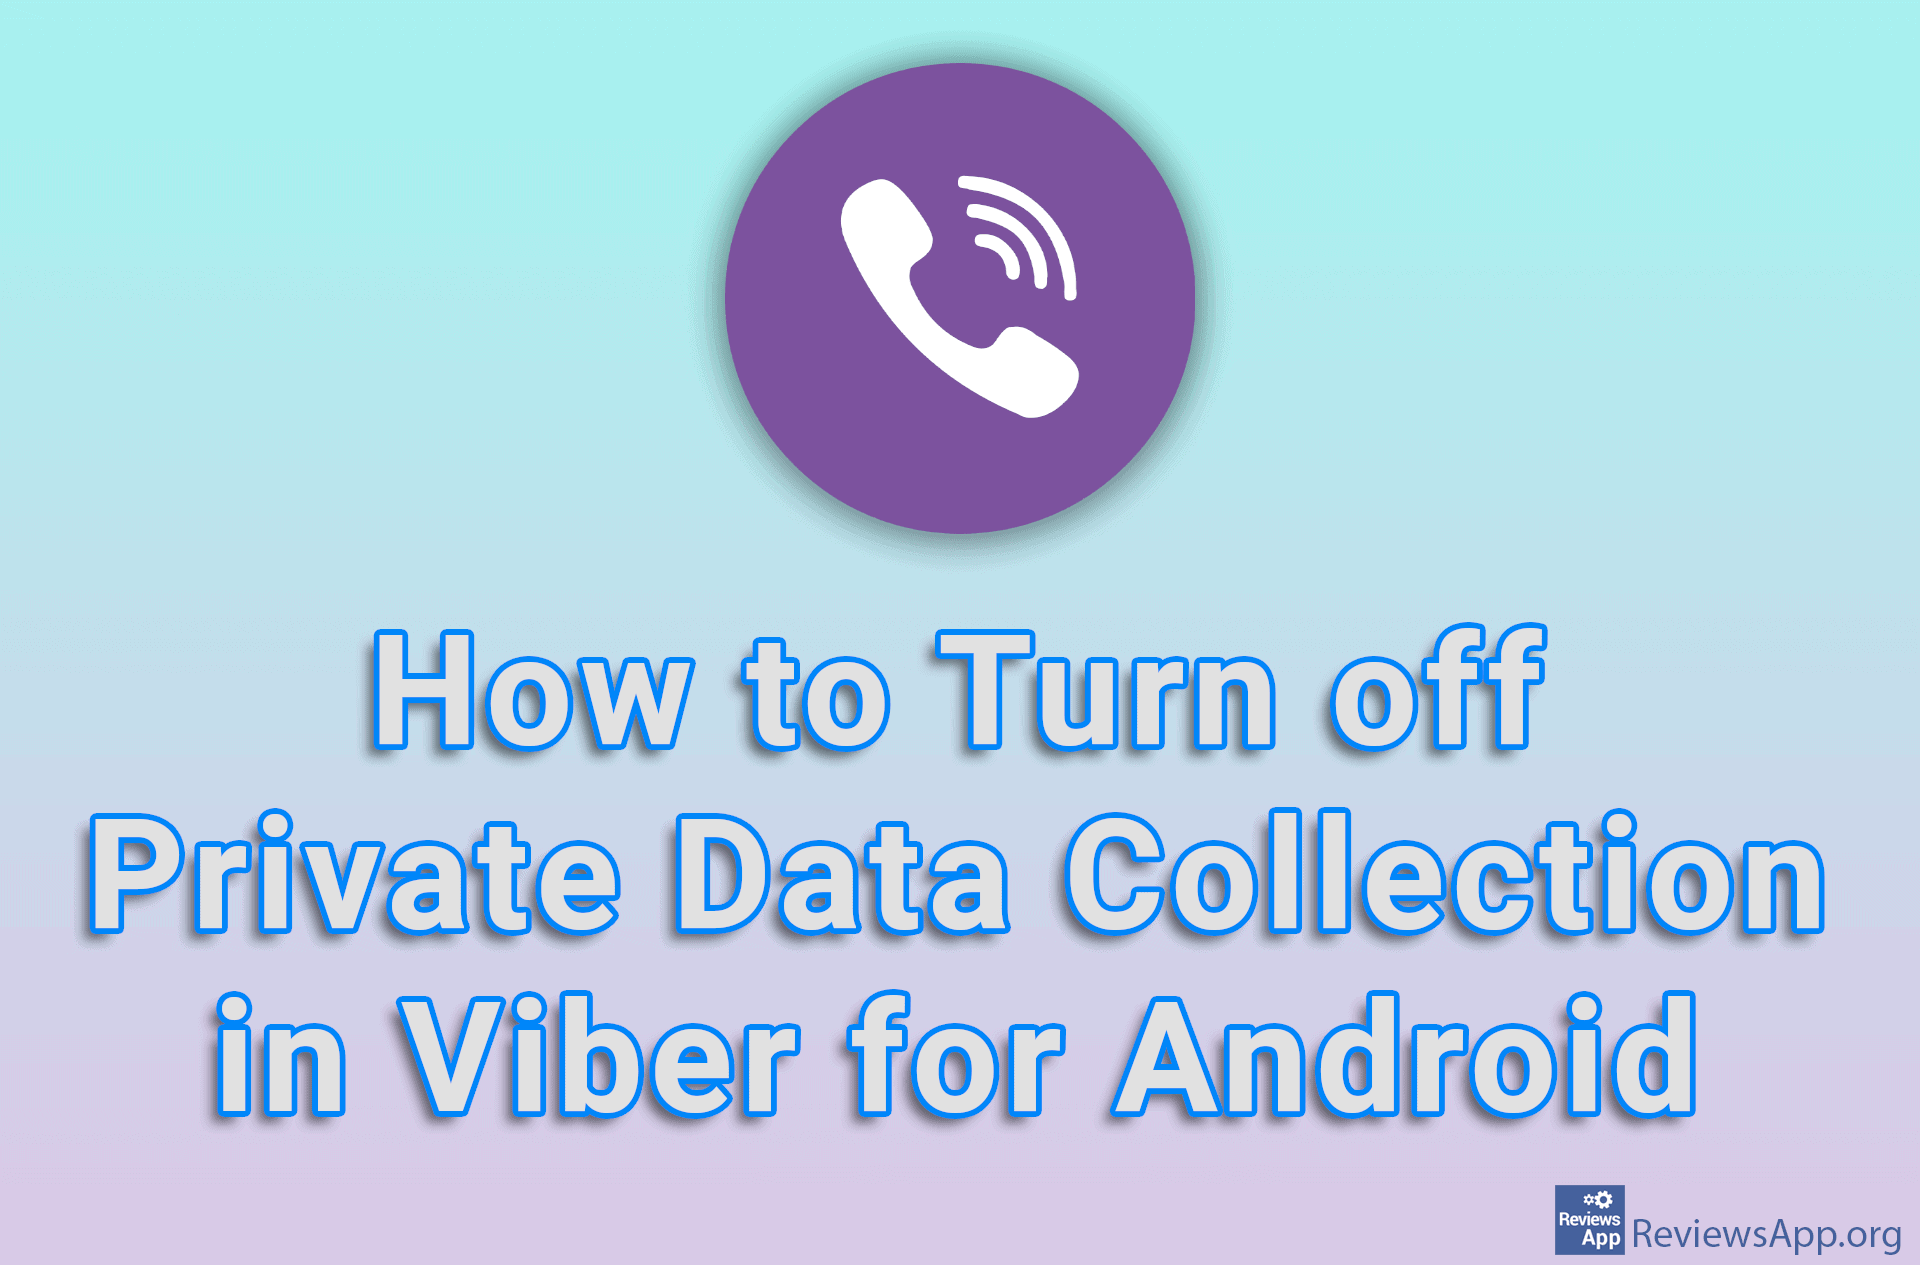 How to Turn off Private Data Collection in Viber for Android